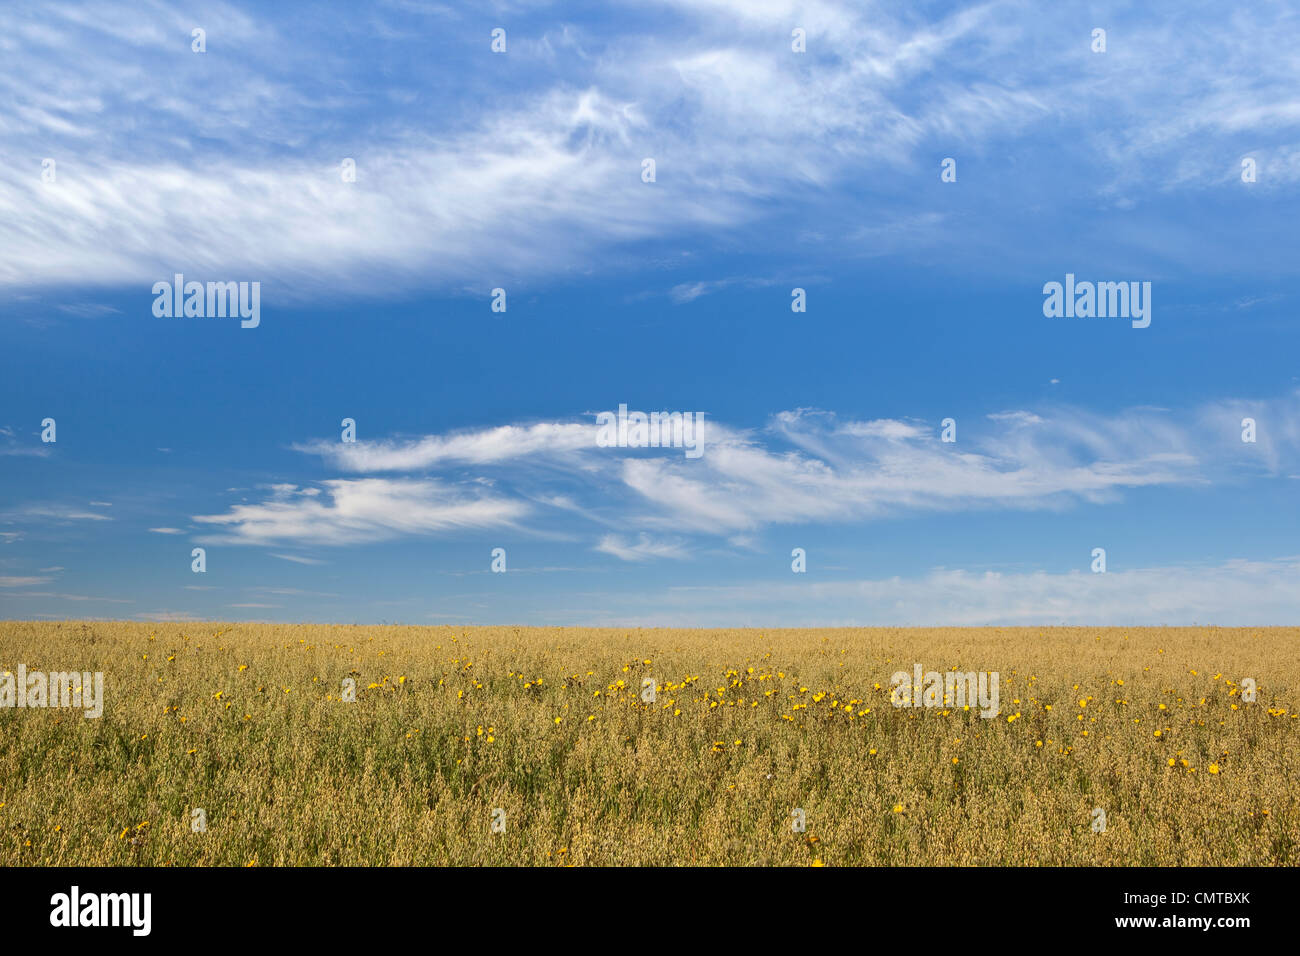 A  field of oats in summer with a few cornfield weeds underneath a blue sky with fair weather clouds Stock Photo